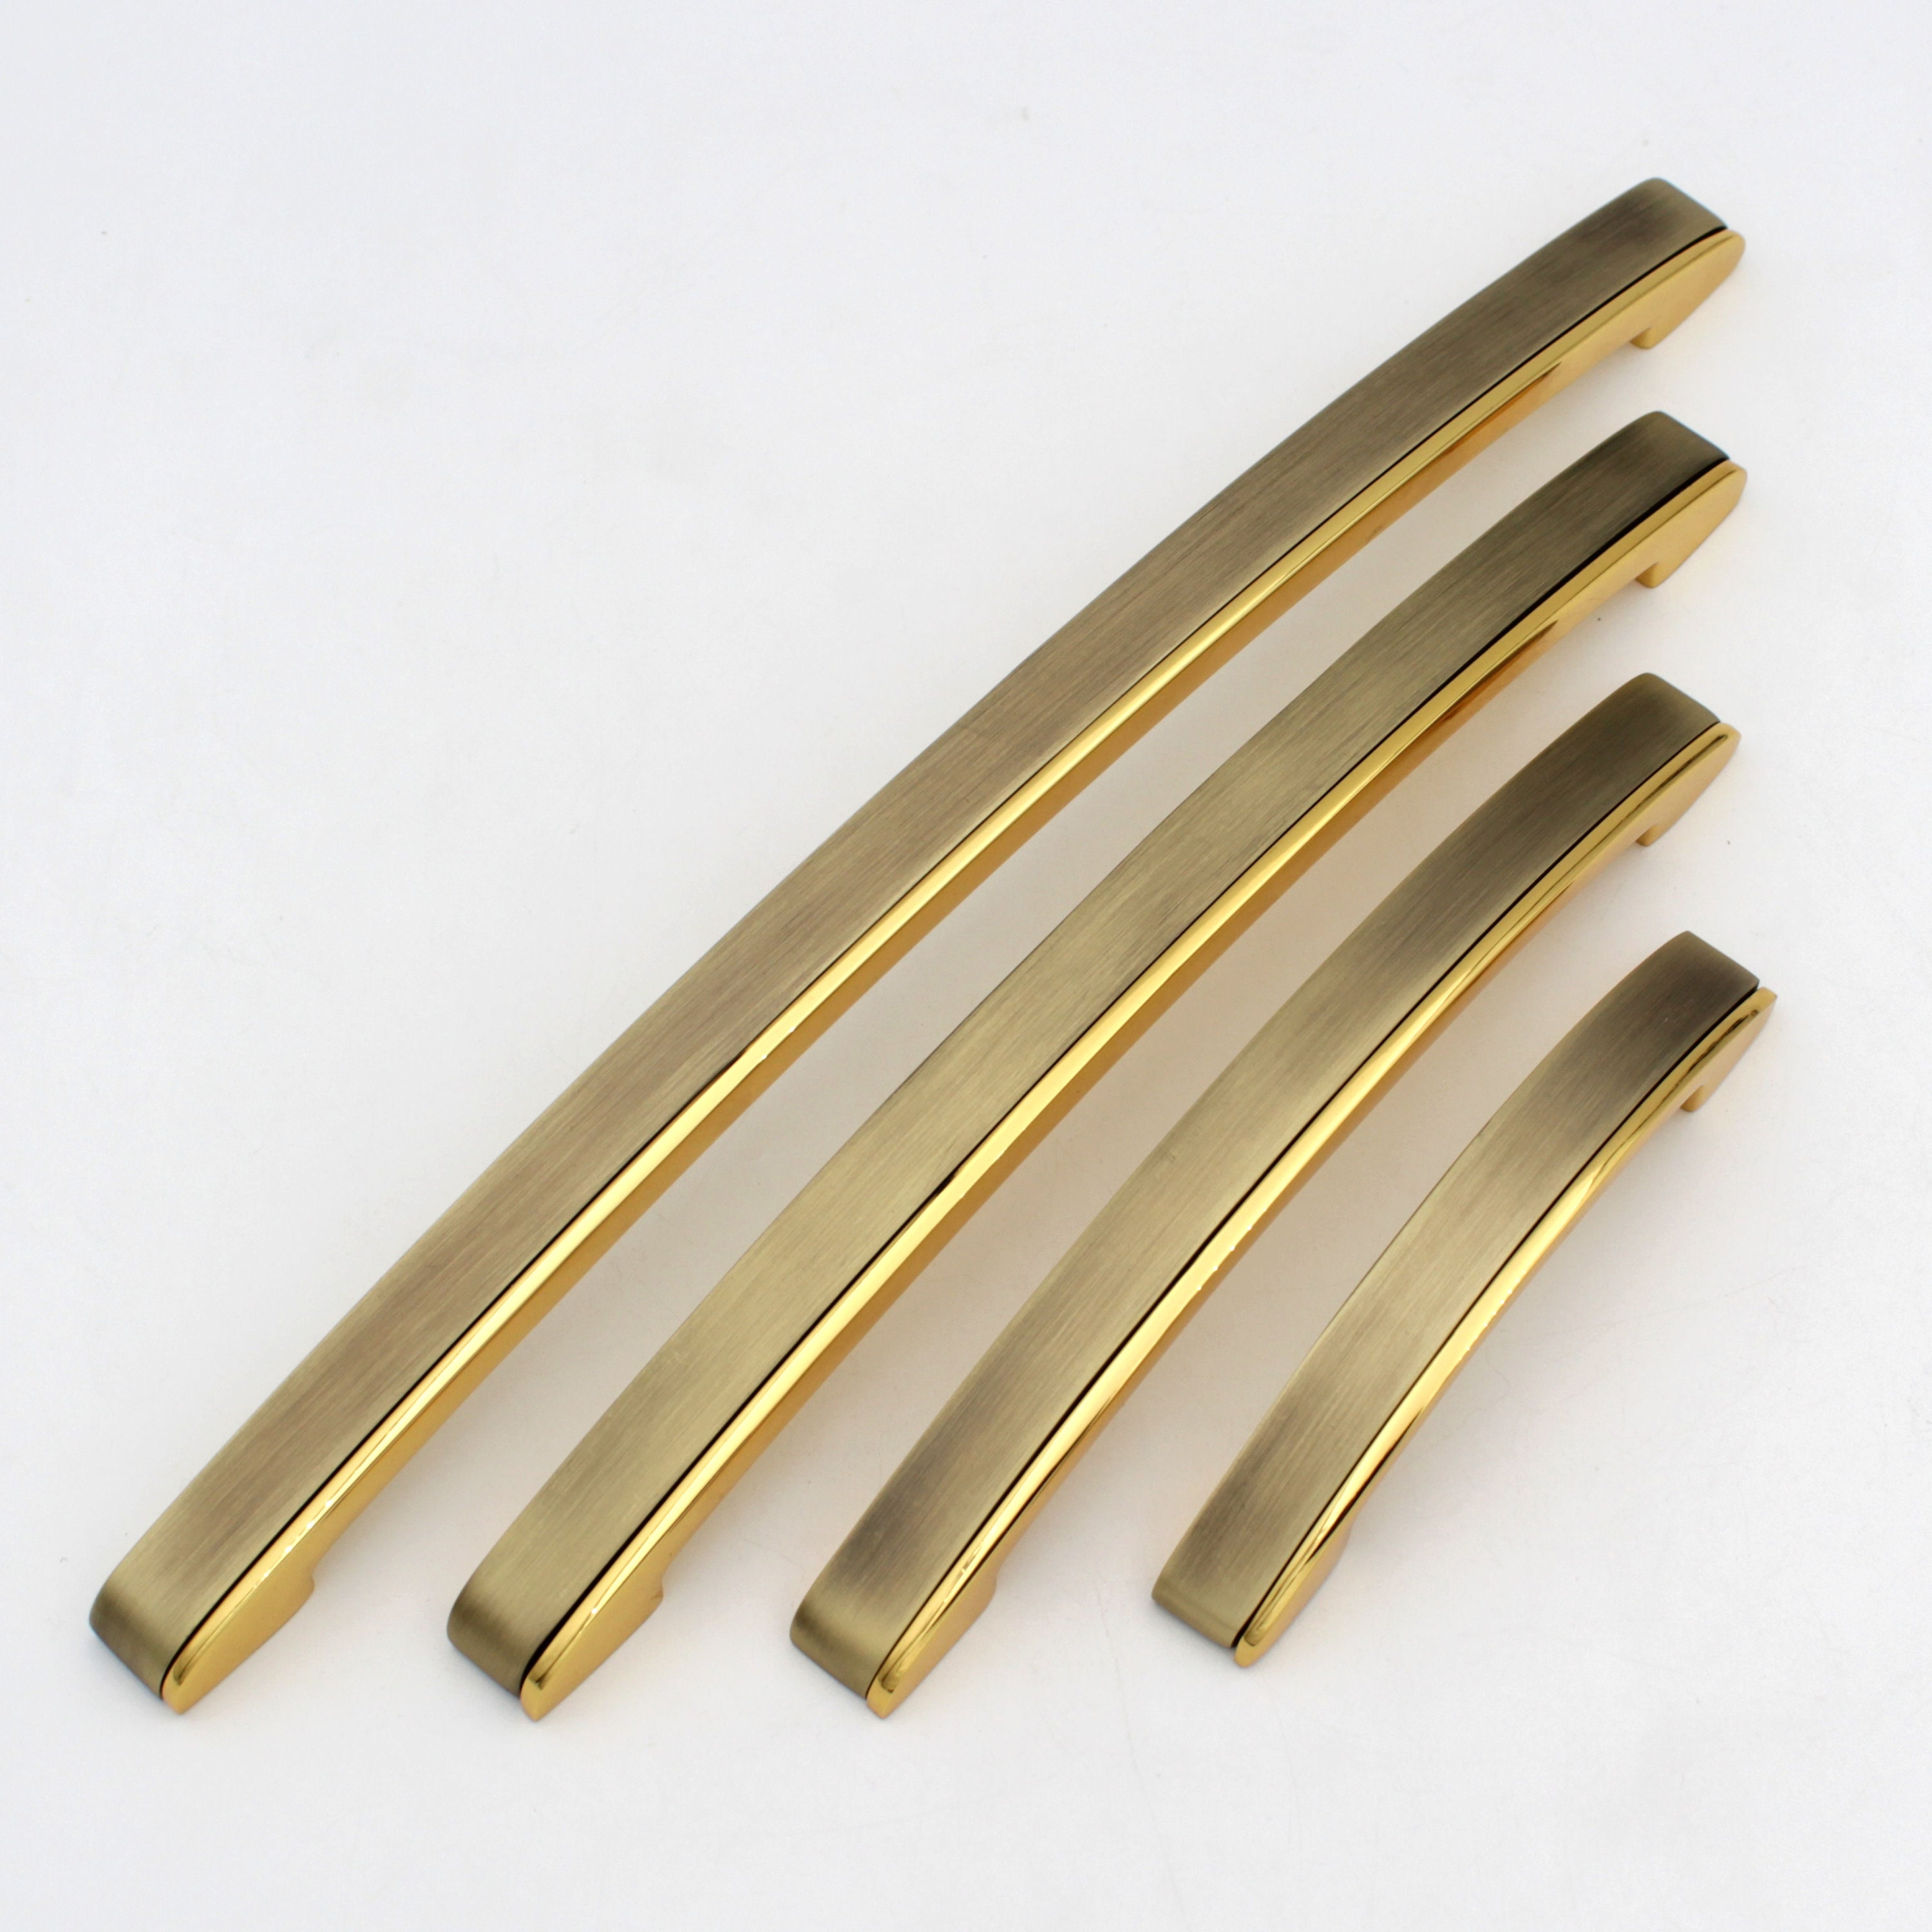 Buy Antique Brass Cabinet Pulls Online In India -  India